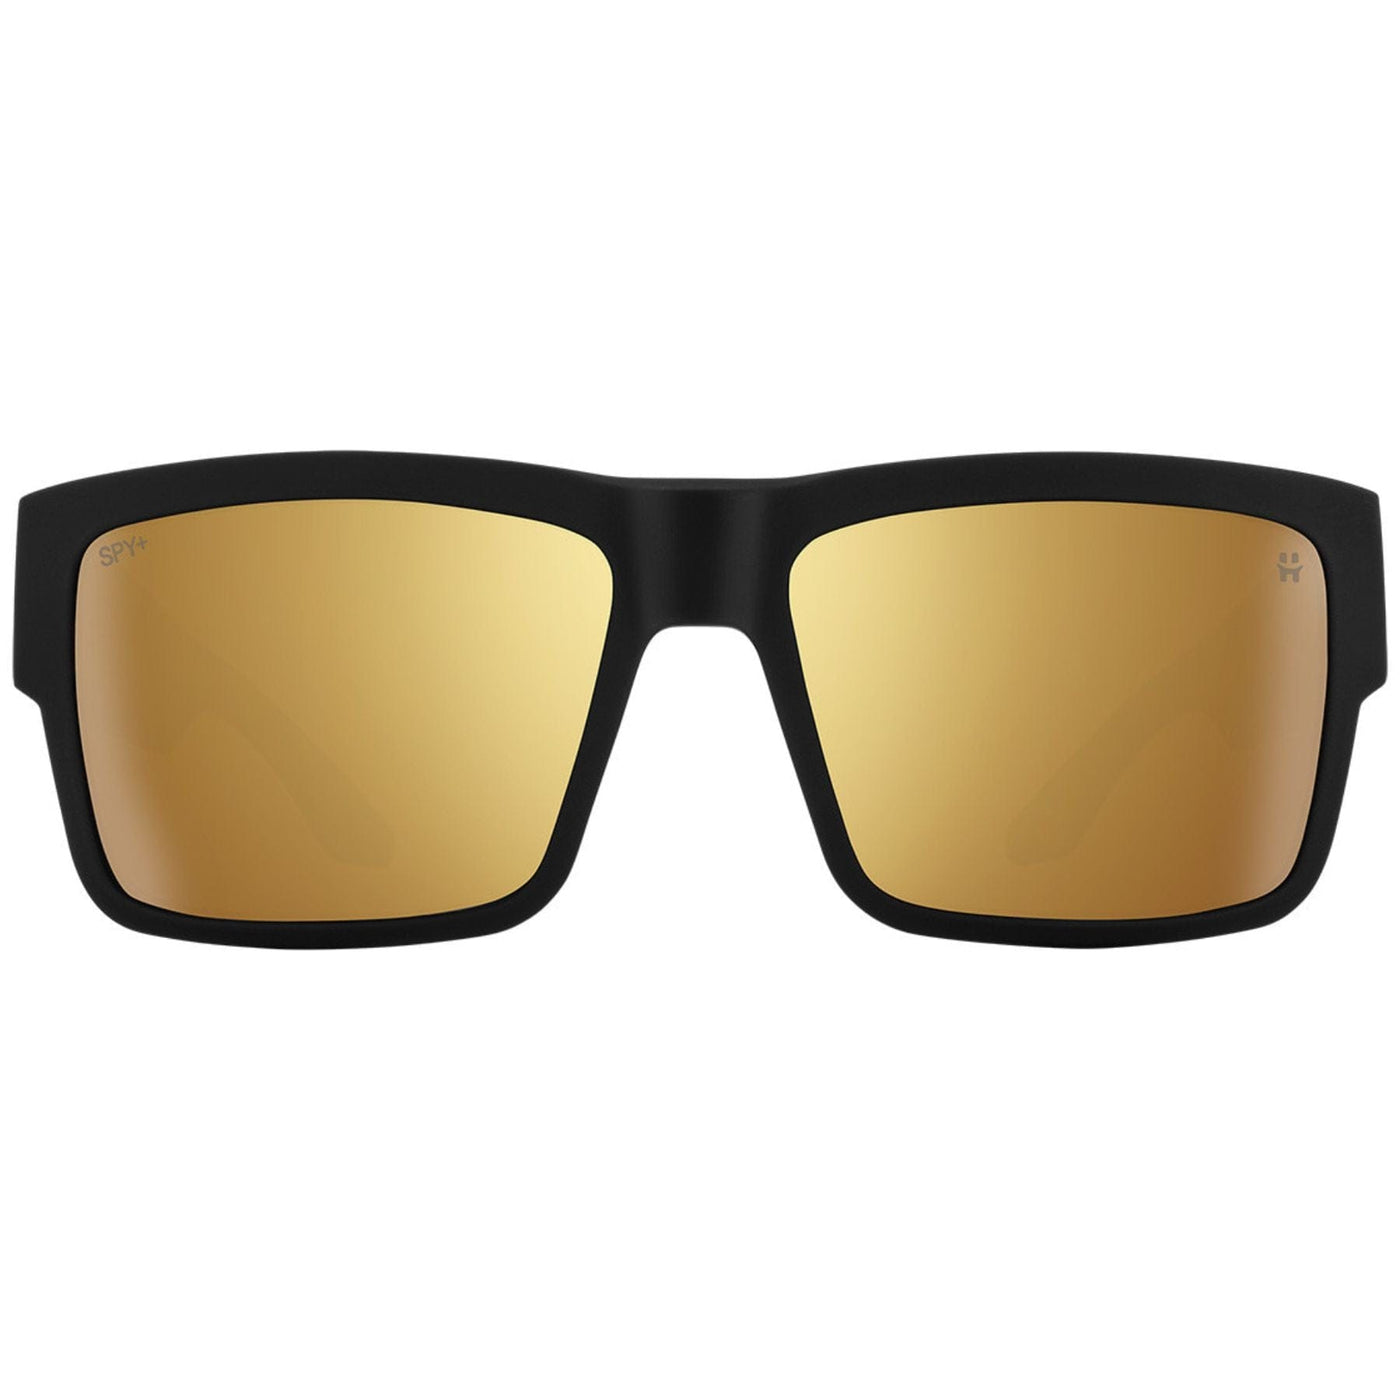 SPY CYRUS Sunglasses, Happy Lens - Gold 8Lines Shop - Fast Shipping